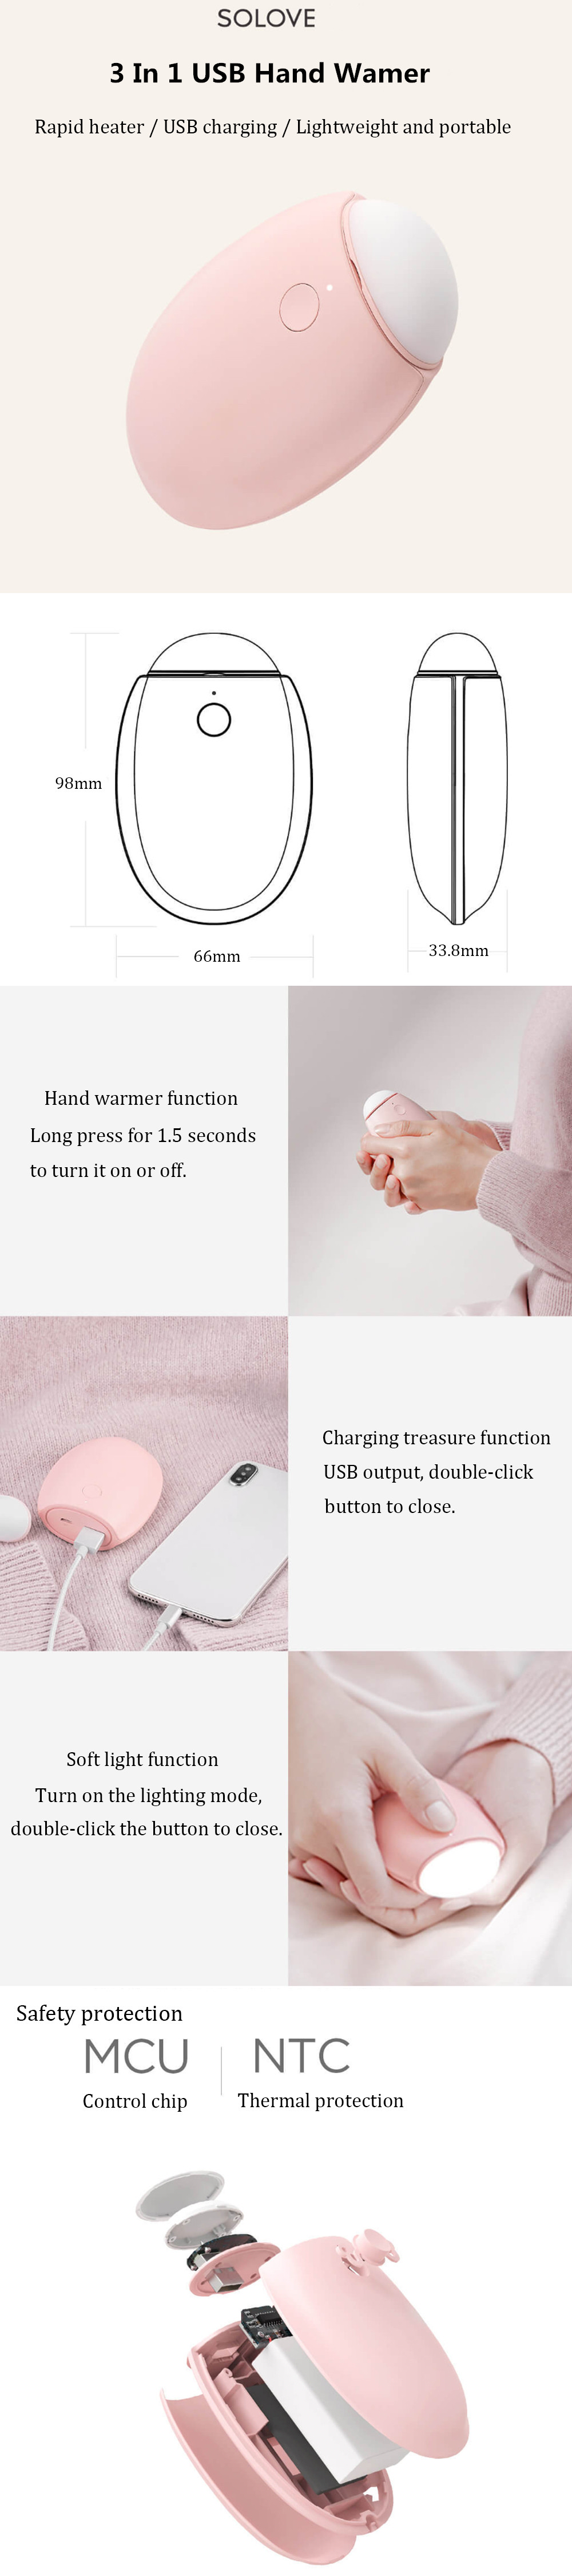 SOLOVE-3-In-1-Hand-Wamer-USB-Rechargeable-Mini-Heater-3600mAh-Power-Bank-LED-Night-Light-from-Xiaomi-1408265-1